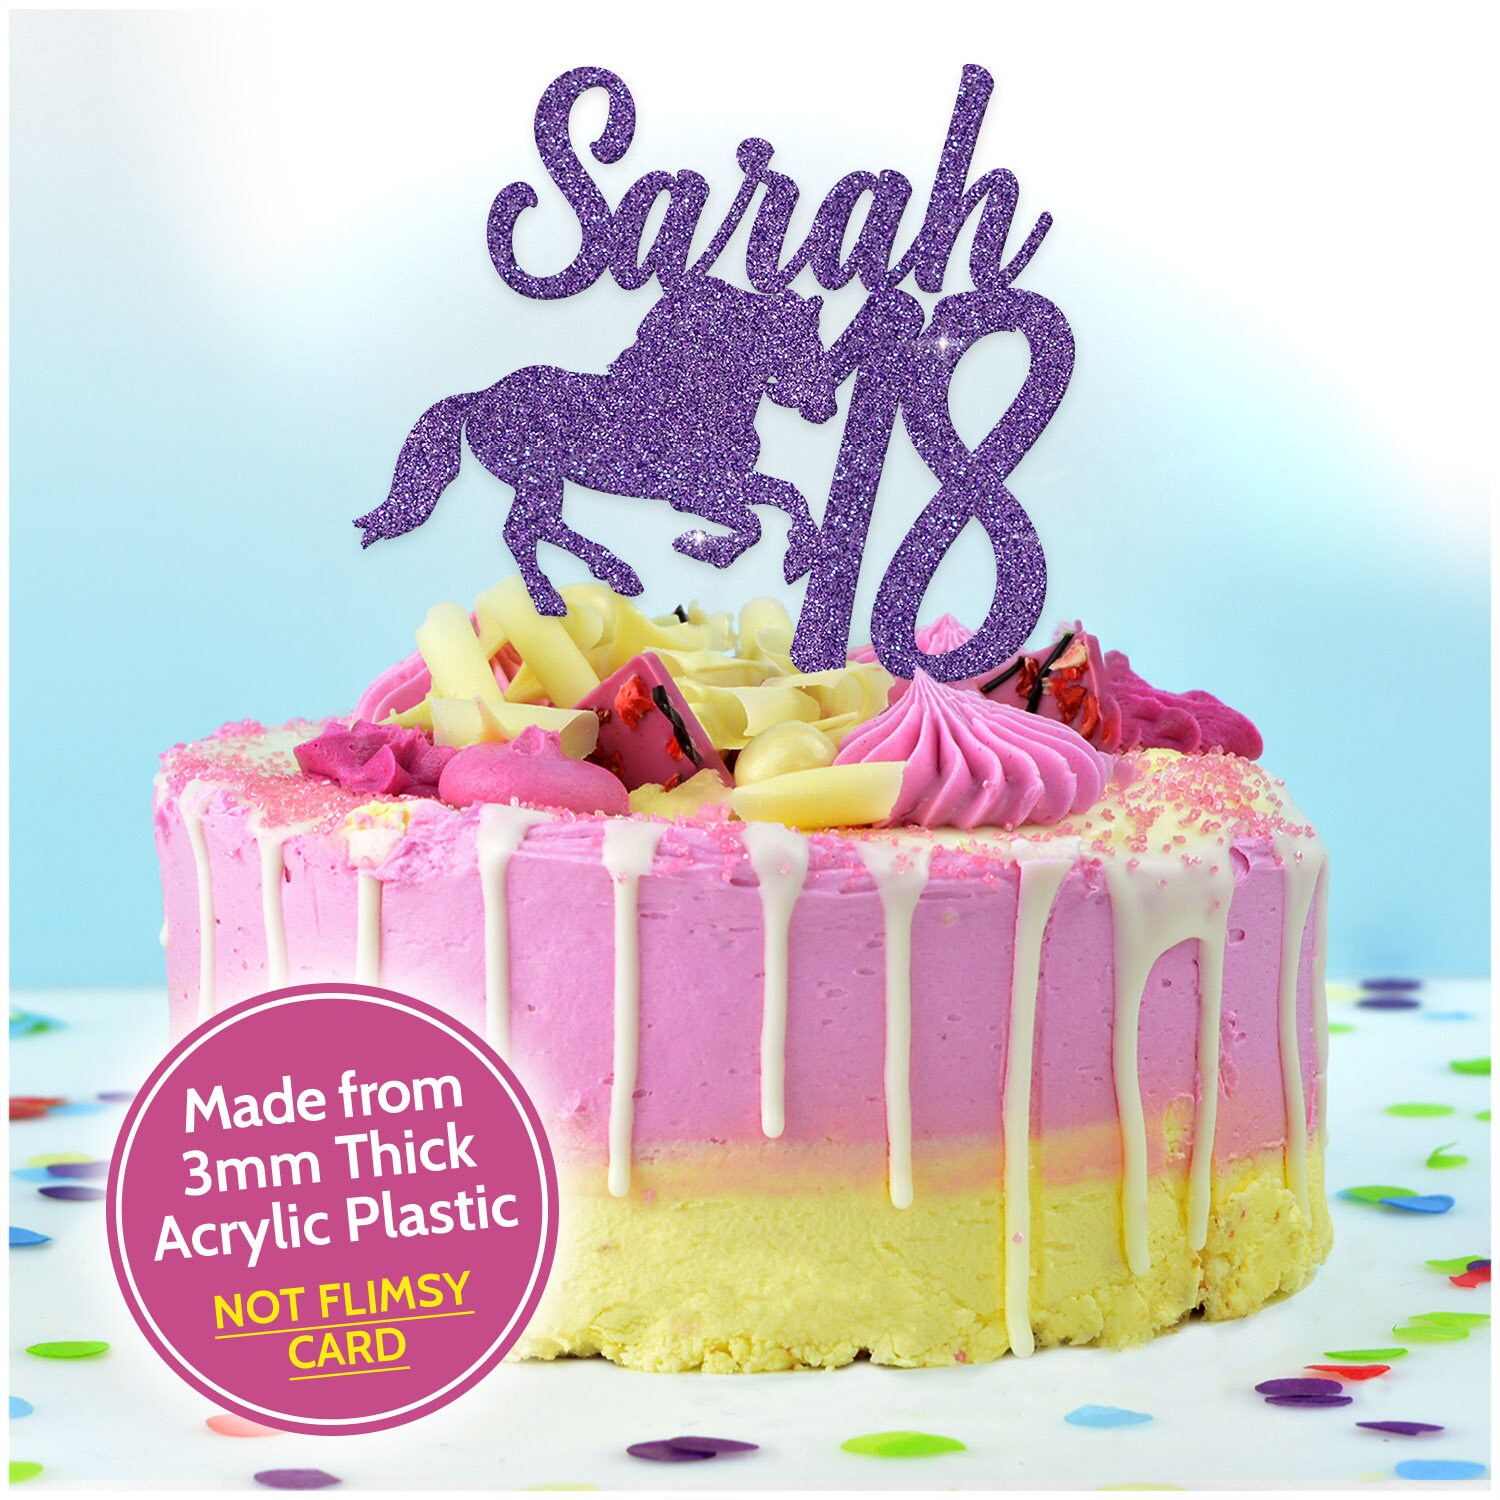 Gold Silver Pink Purple Acrylic Wooden Horse Cake Topper Horse Cake Toppers ANY Age ANY Name Birthday Horse Cake Toppers for Her Girls Women PERSONALISED Horse Cake Decorations 